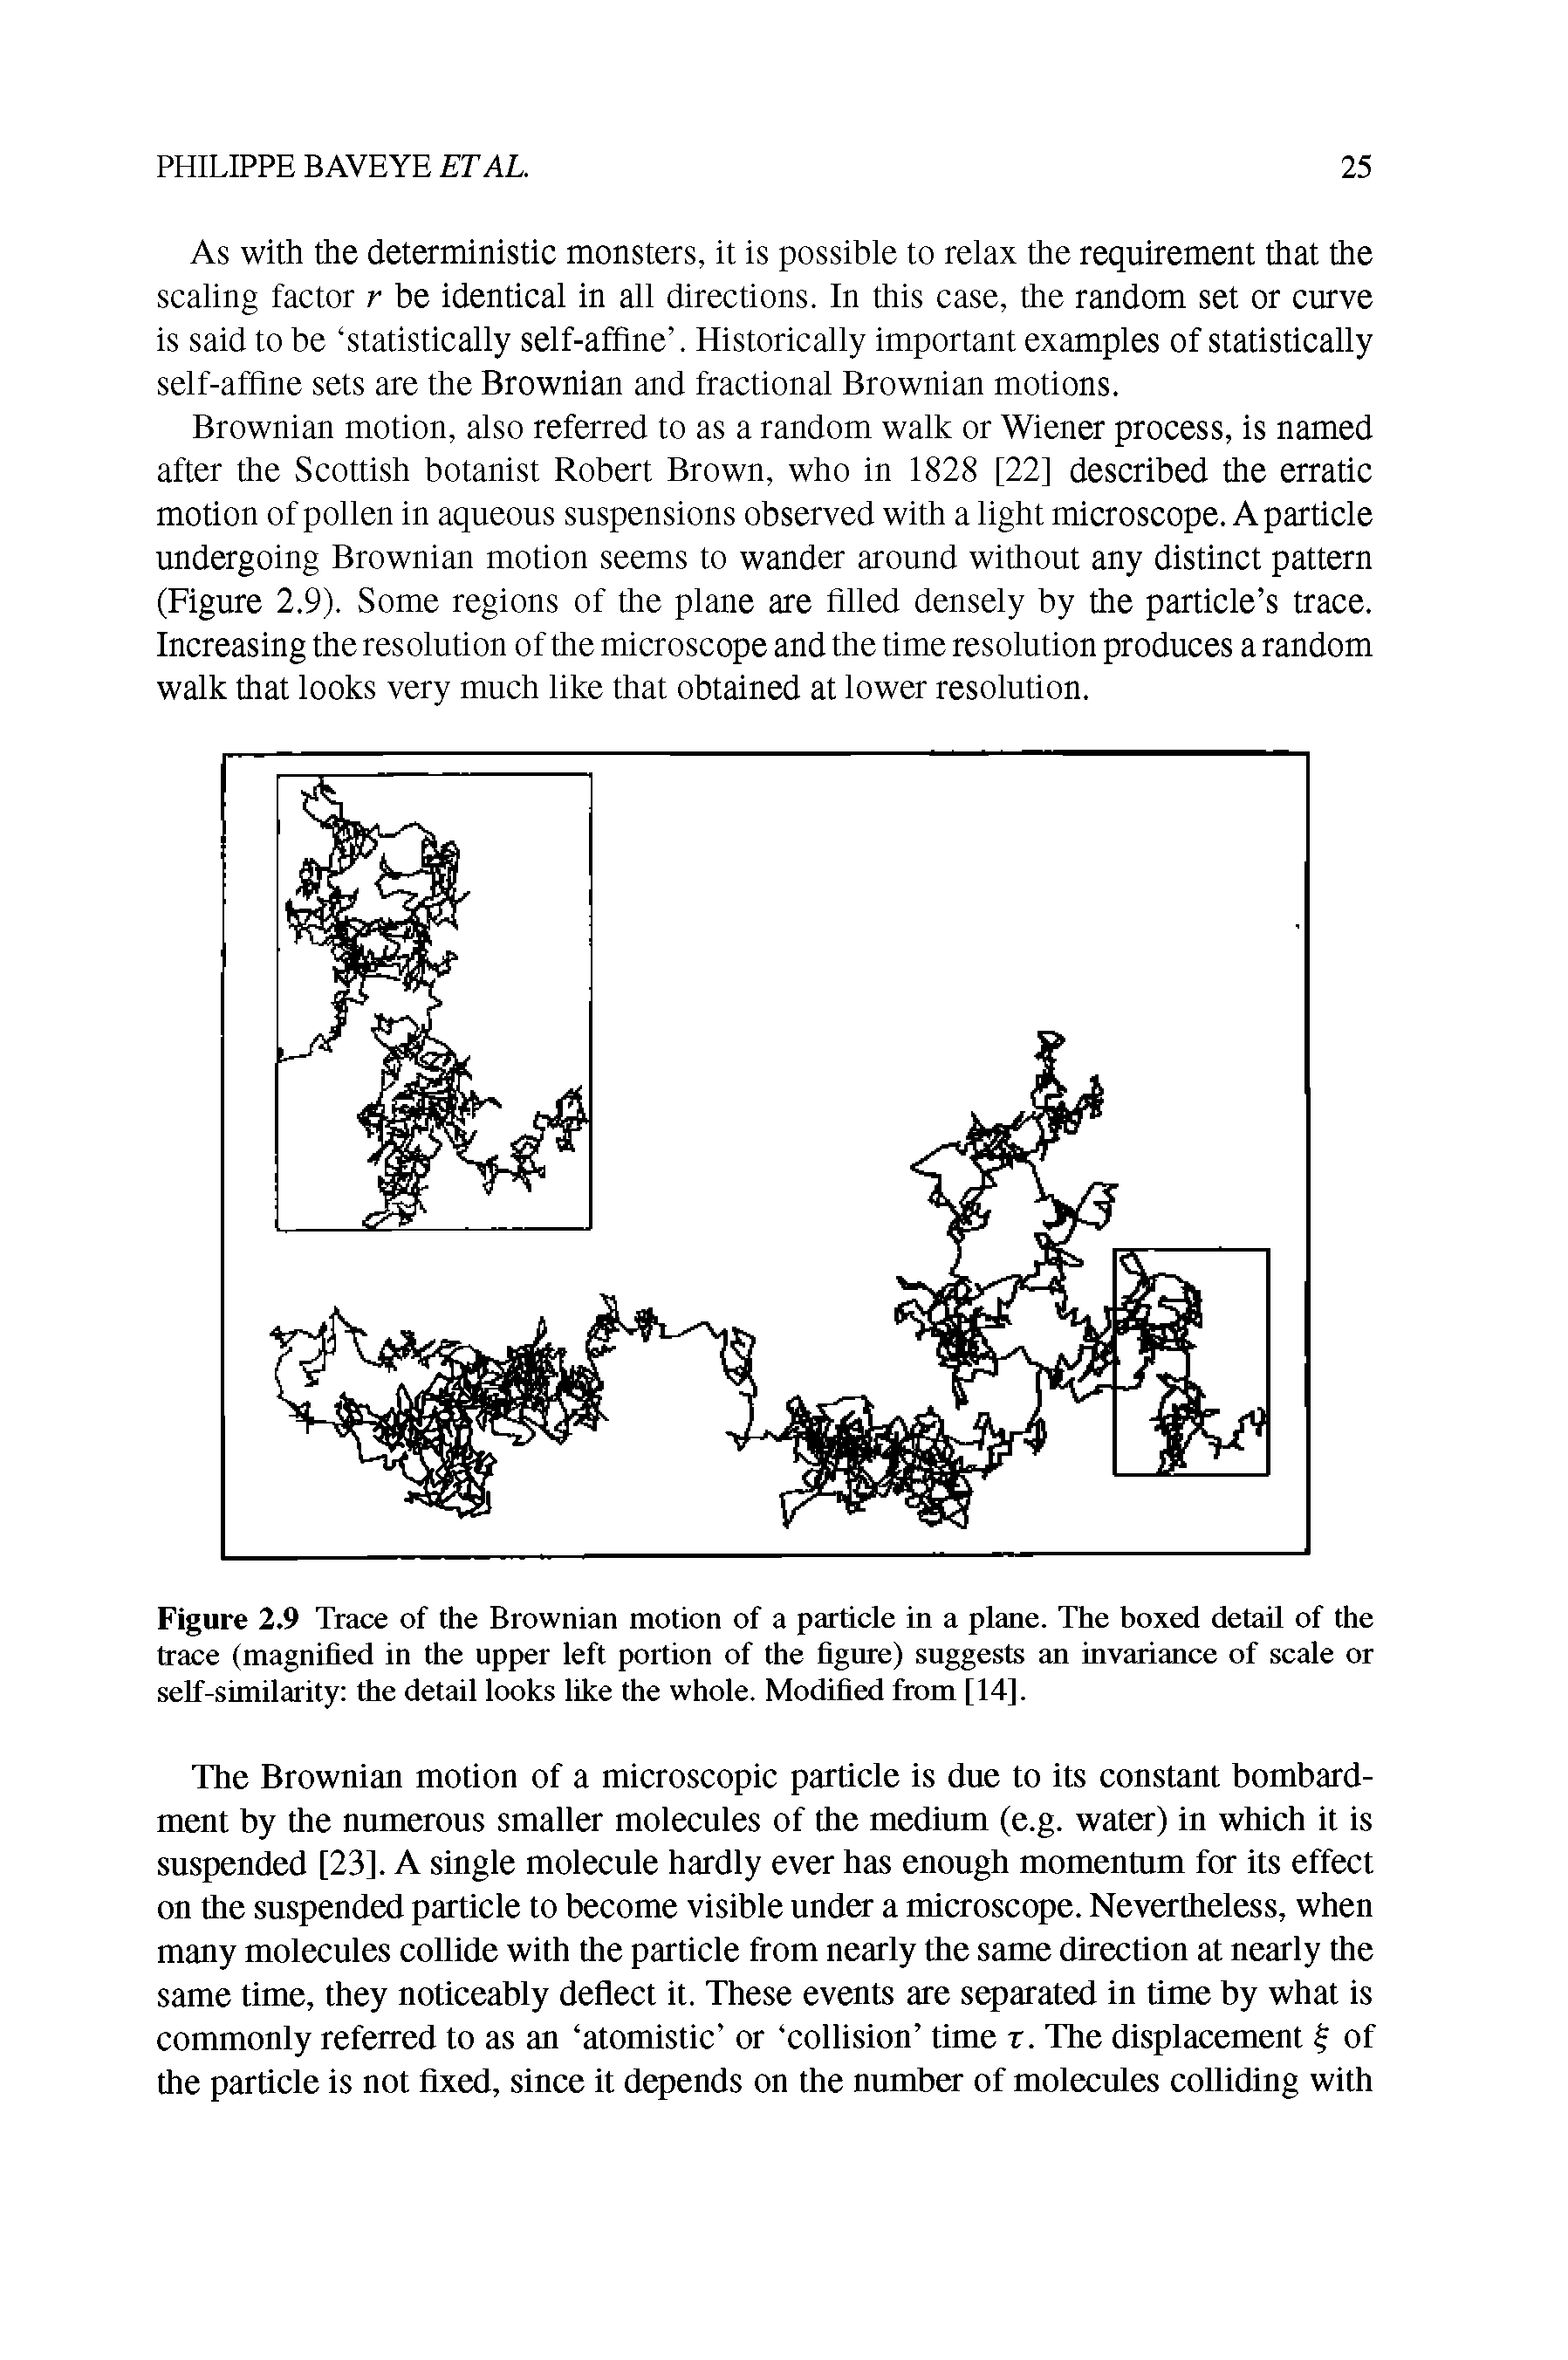 Figure 2.9 Trace of the Brownian motion of a particle in a plane. The boxed detail of the trace (magnified in the upper left portion of the figure) suggests an invariance of scale or self-similarity the detail looks like the whole. Modified from [14].